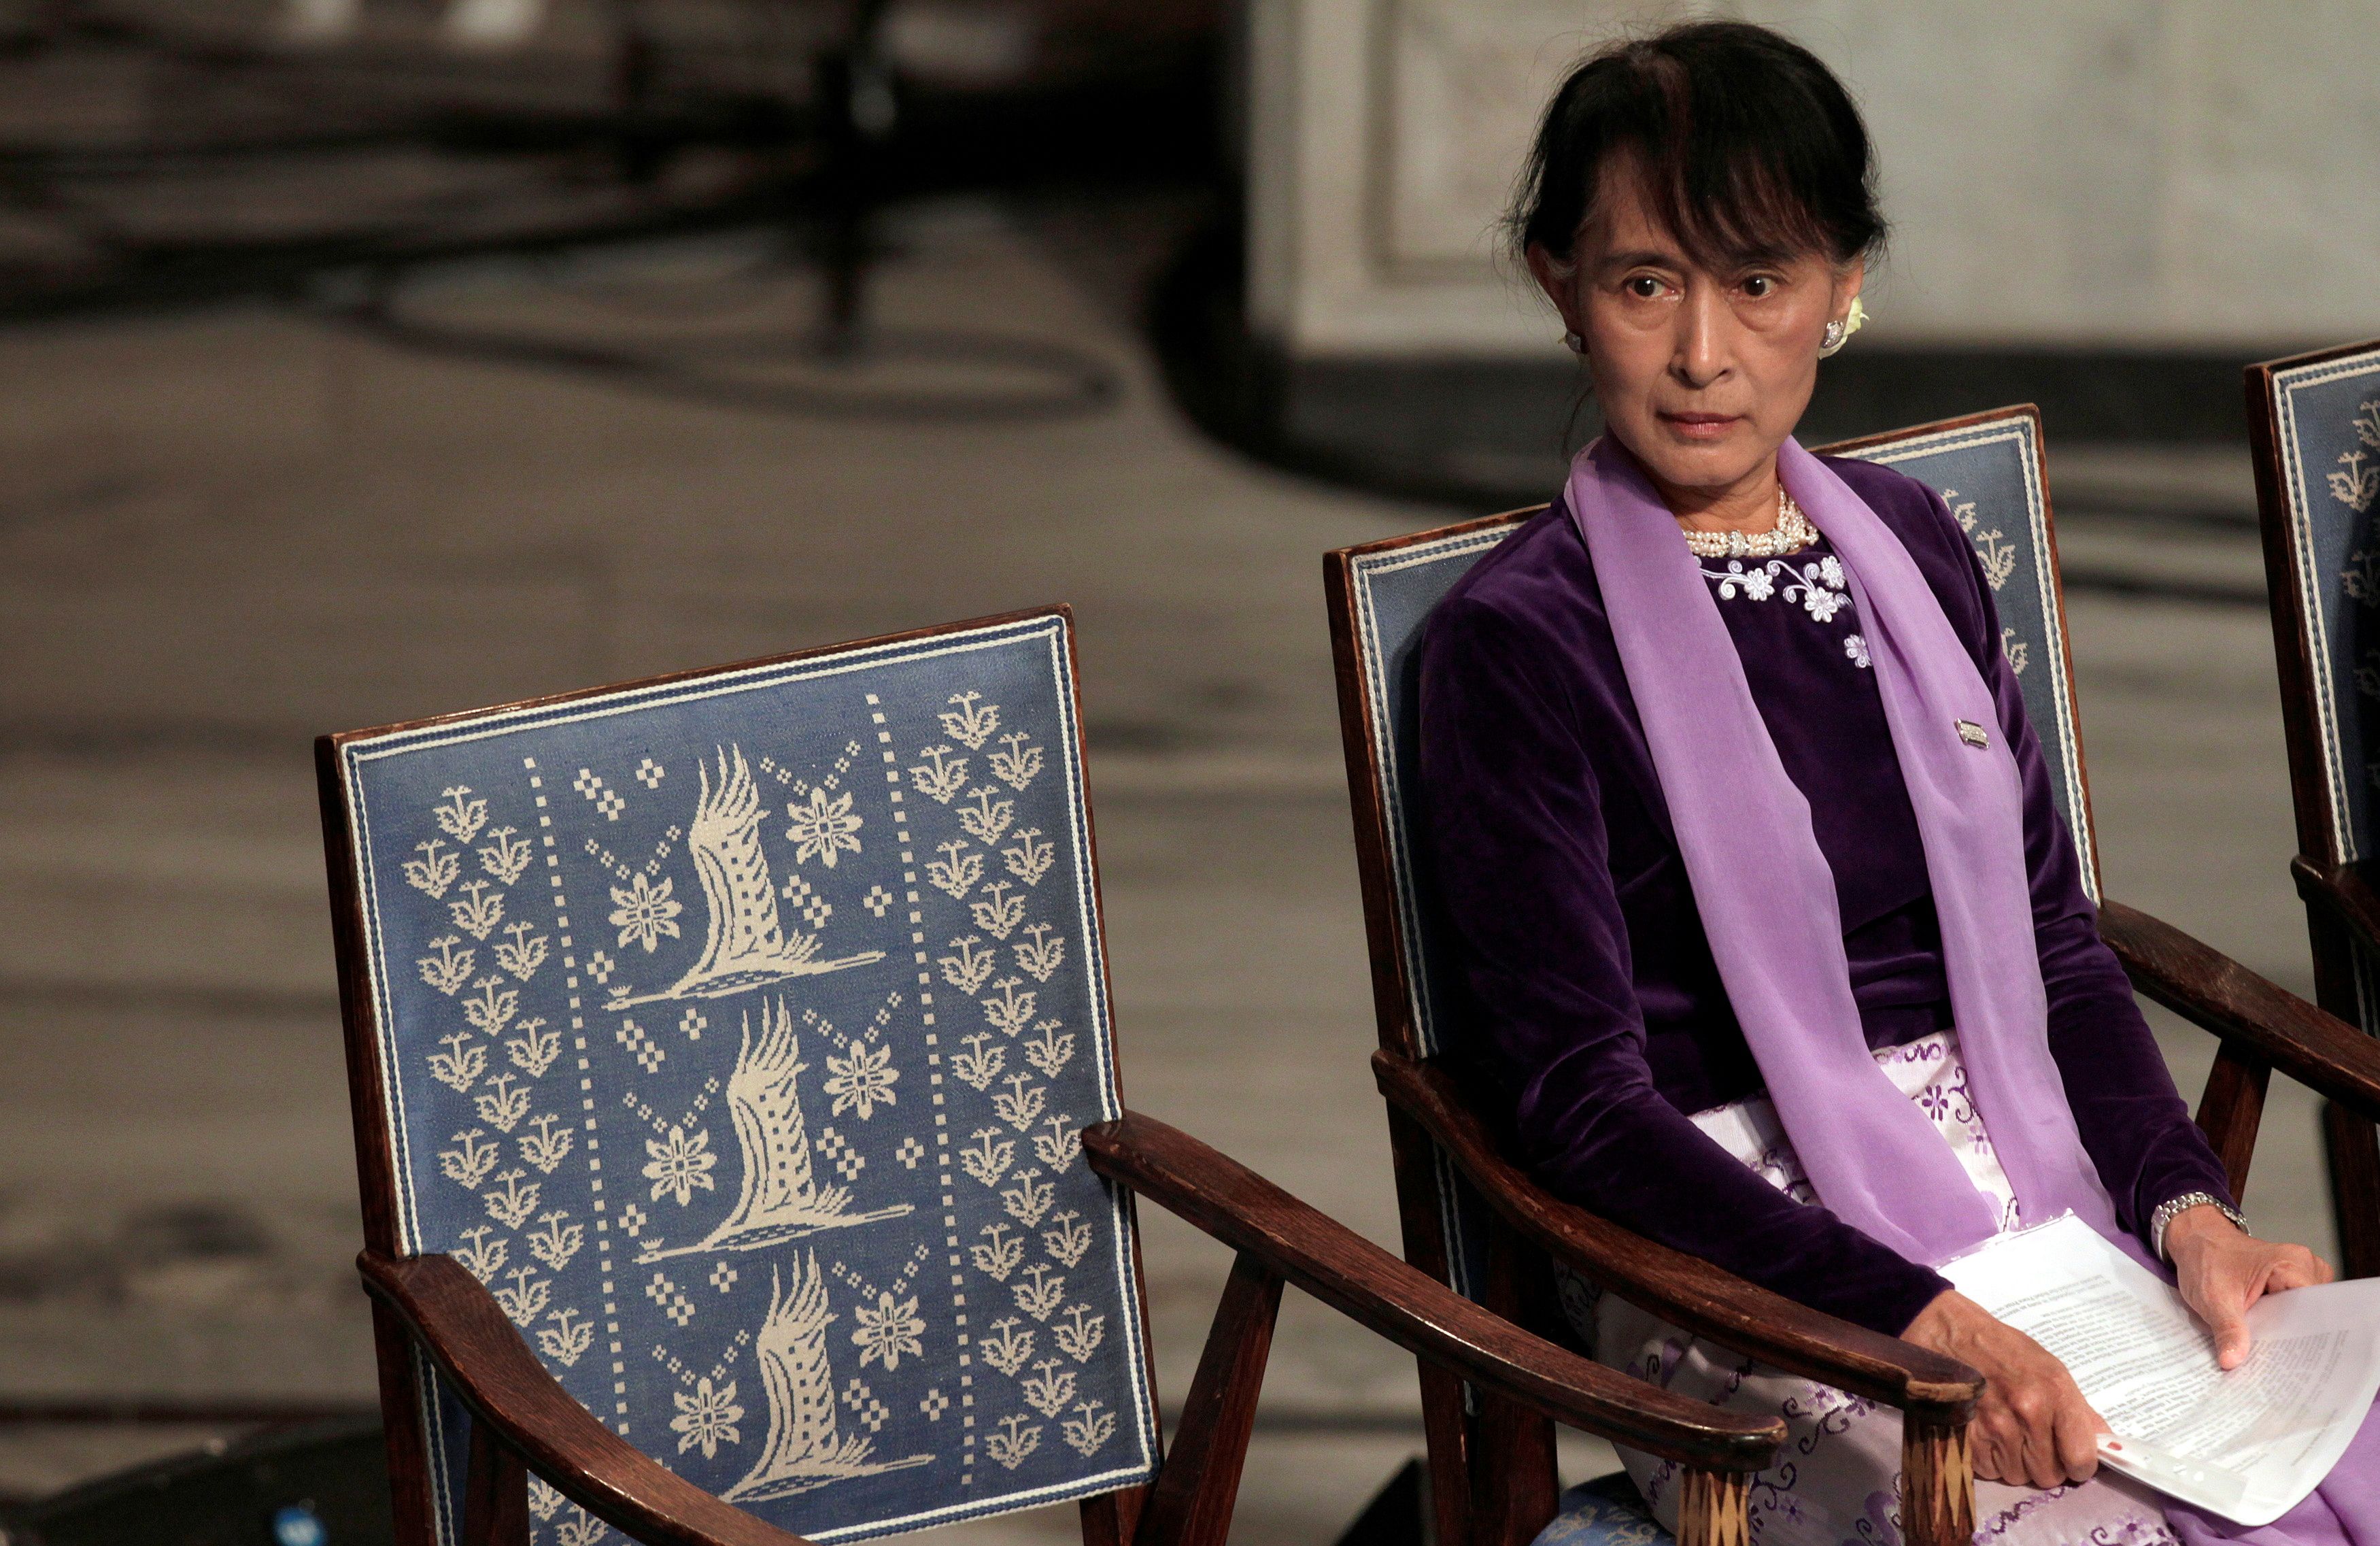 Myanmar opposition leader Aung San Suu Kyi sits before giving her Nobel Lecture at City Hall in Oslo June 16, 2012. REUTERS/Cathal McNaughton